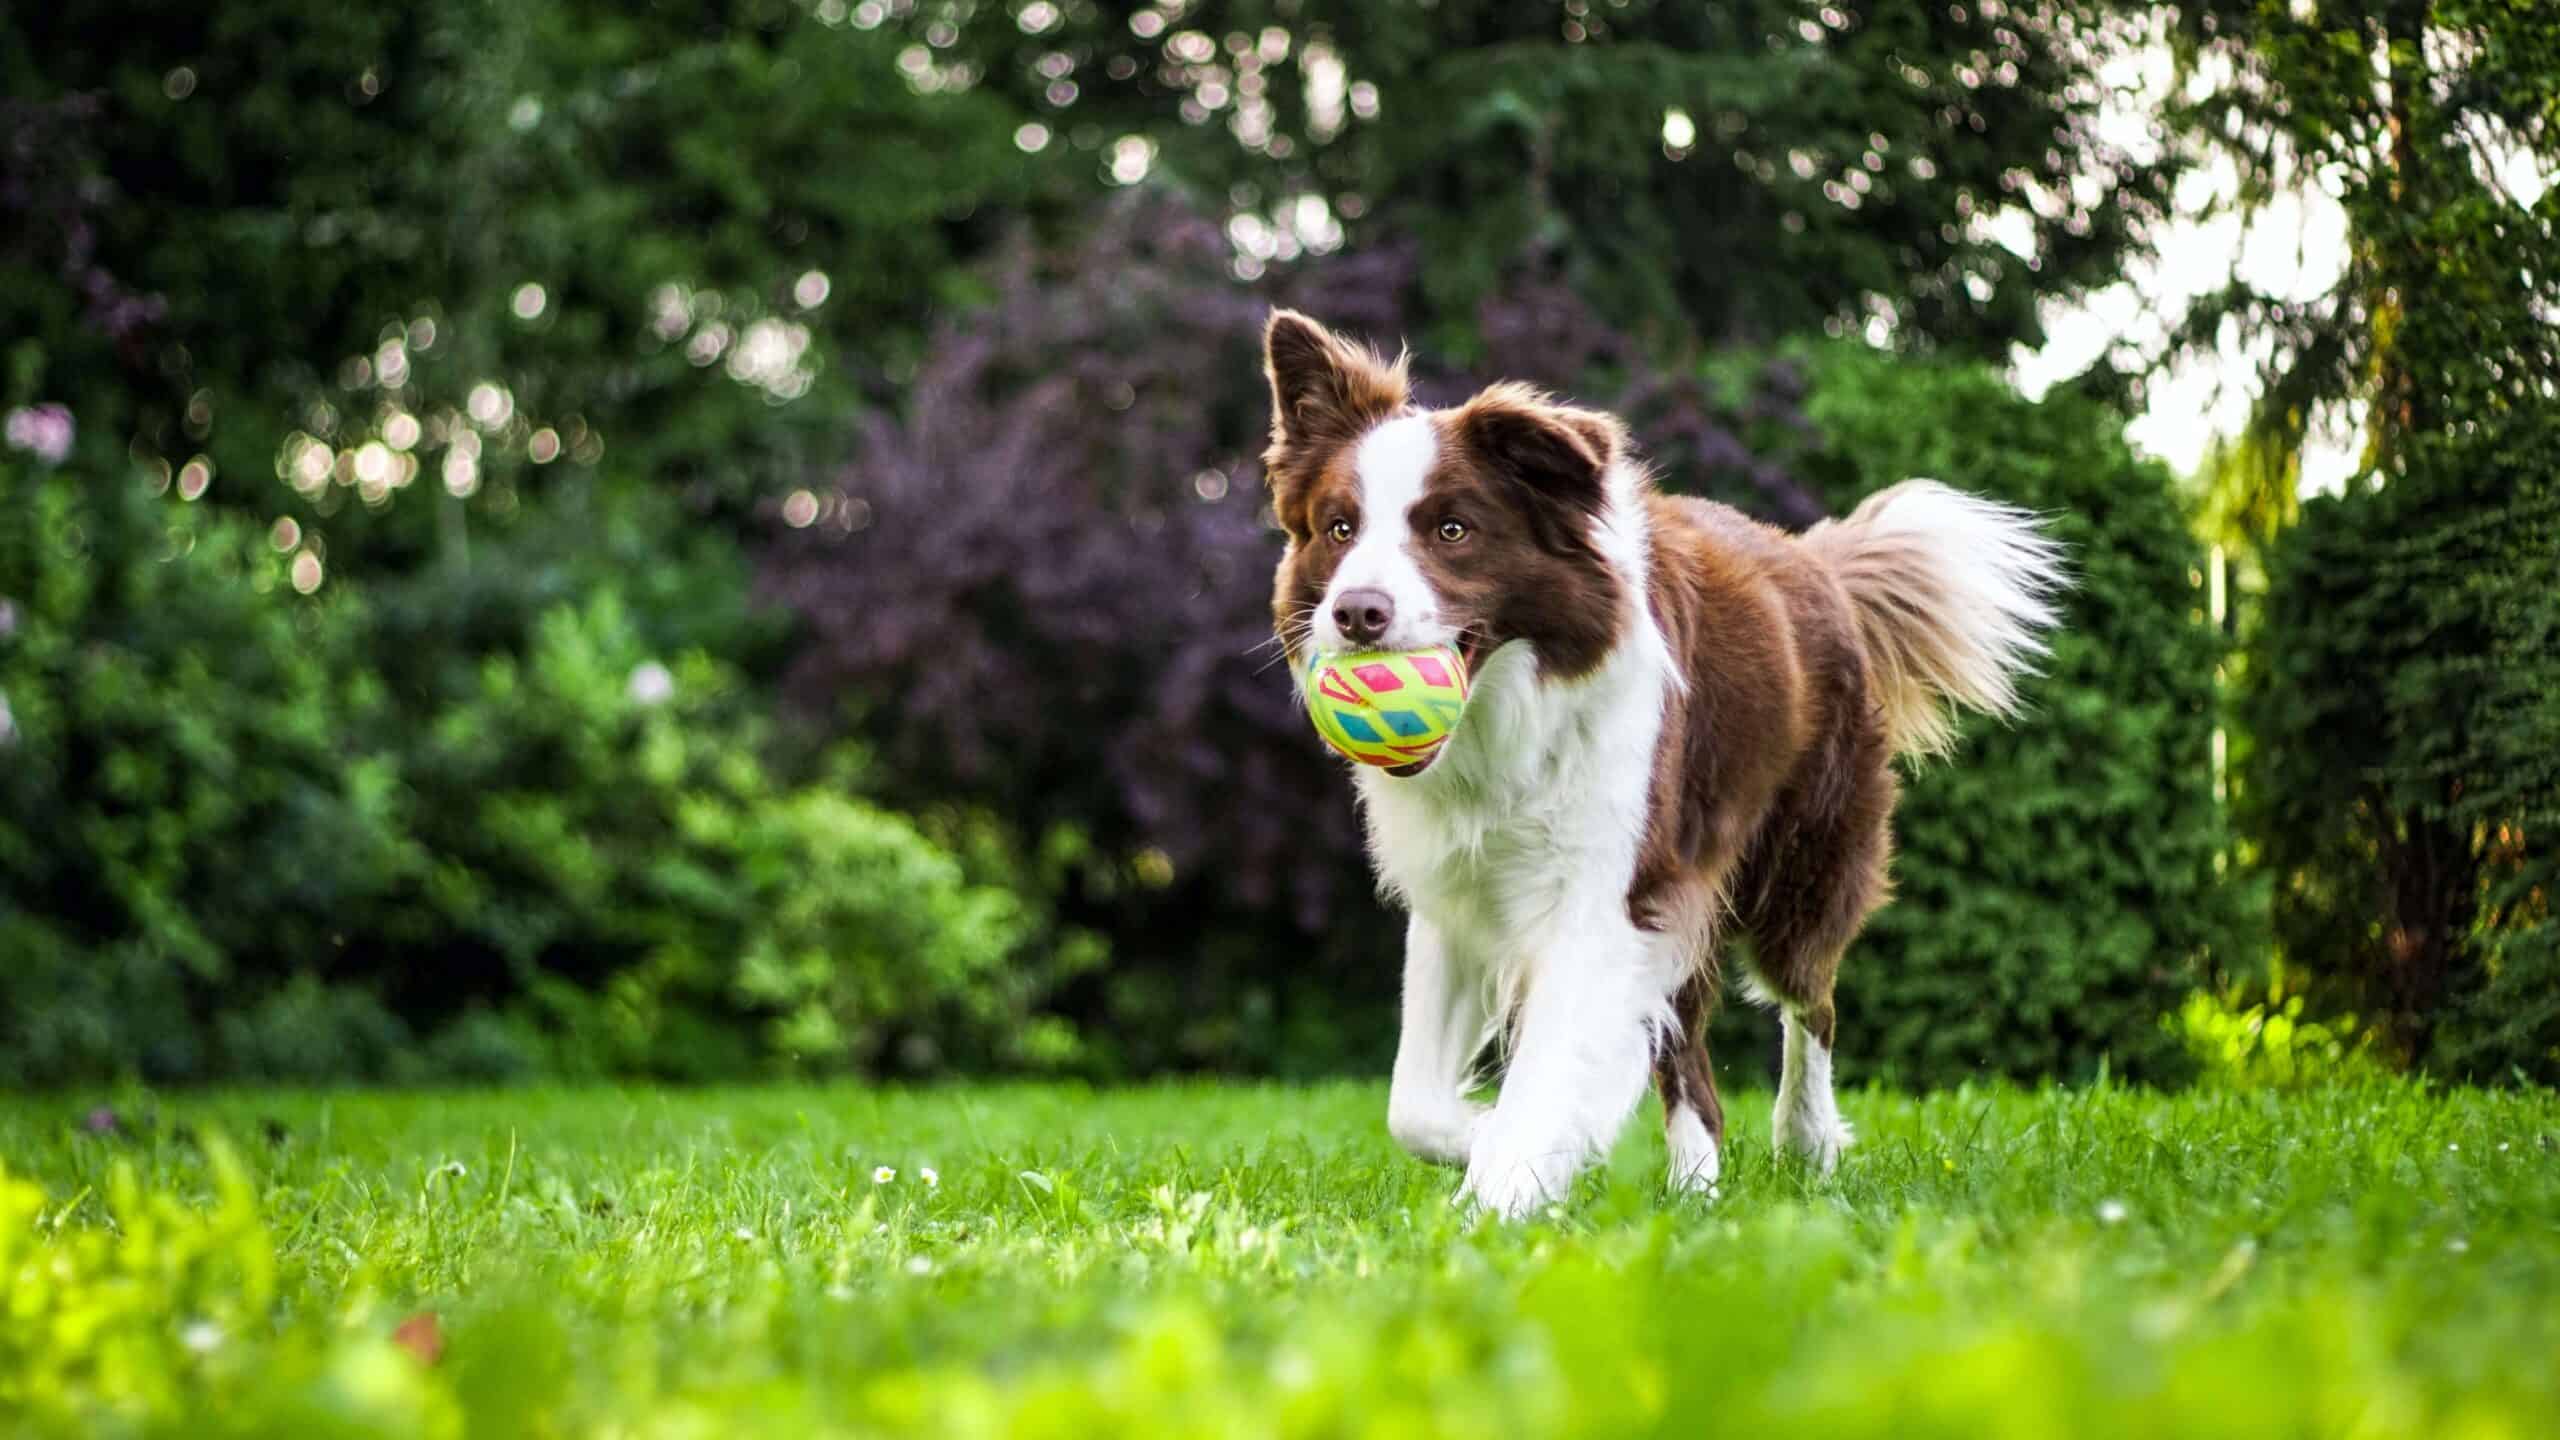 A brown and white dog carrying a ball in a grassy field.